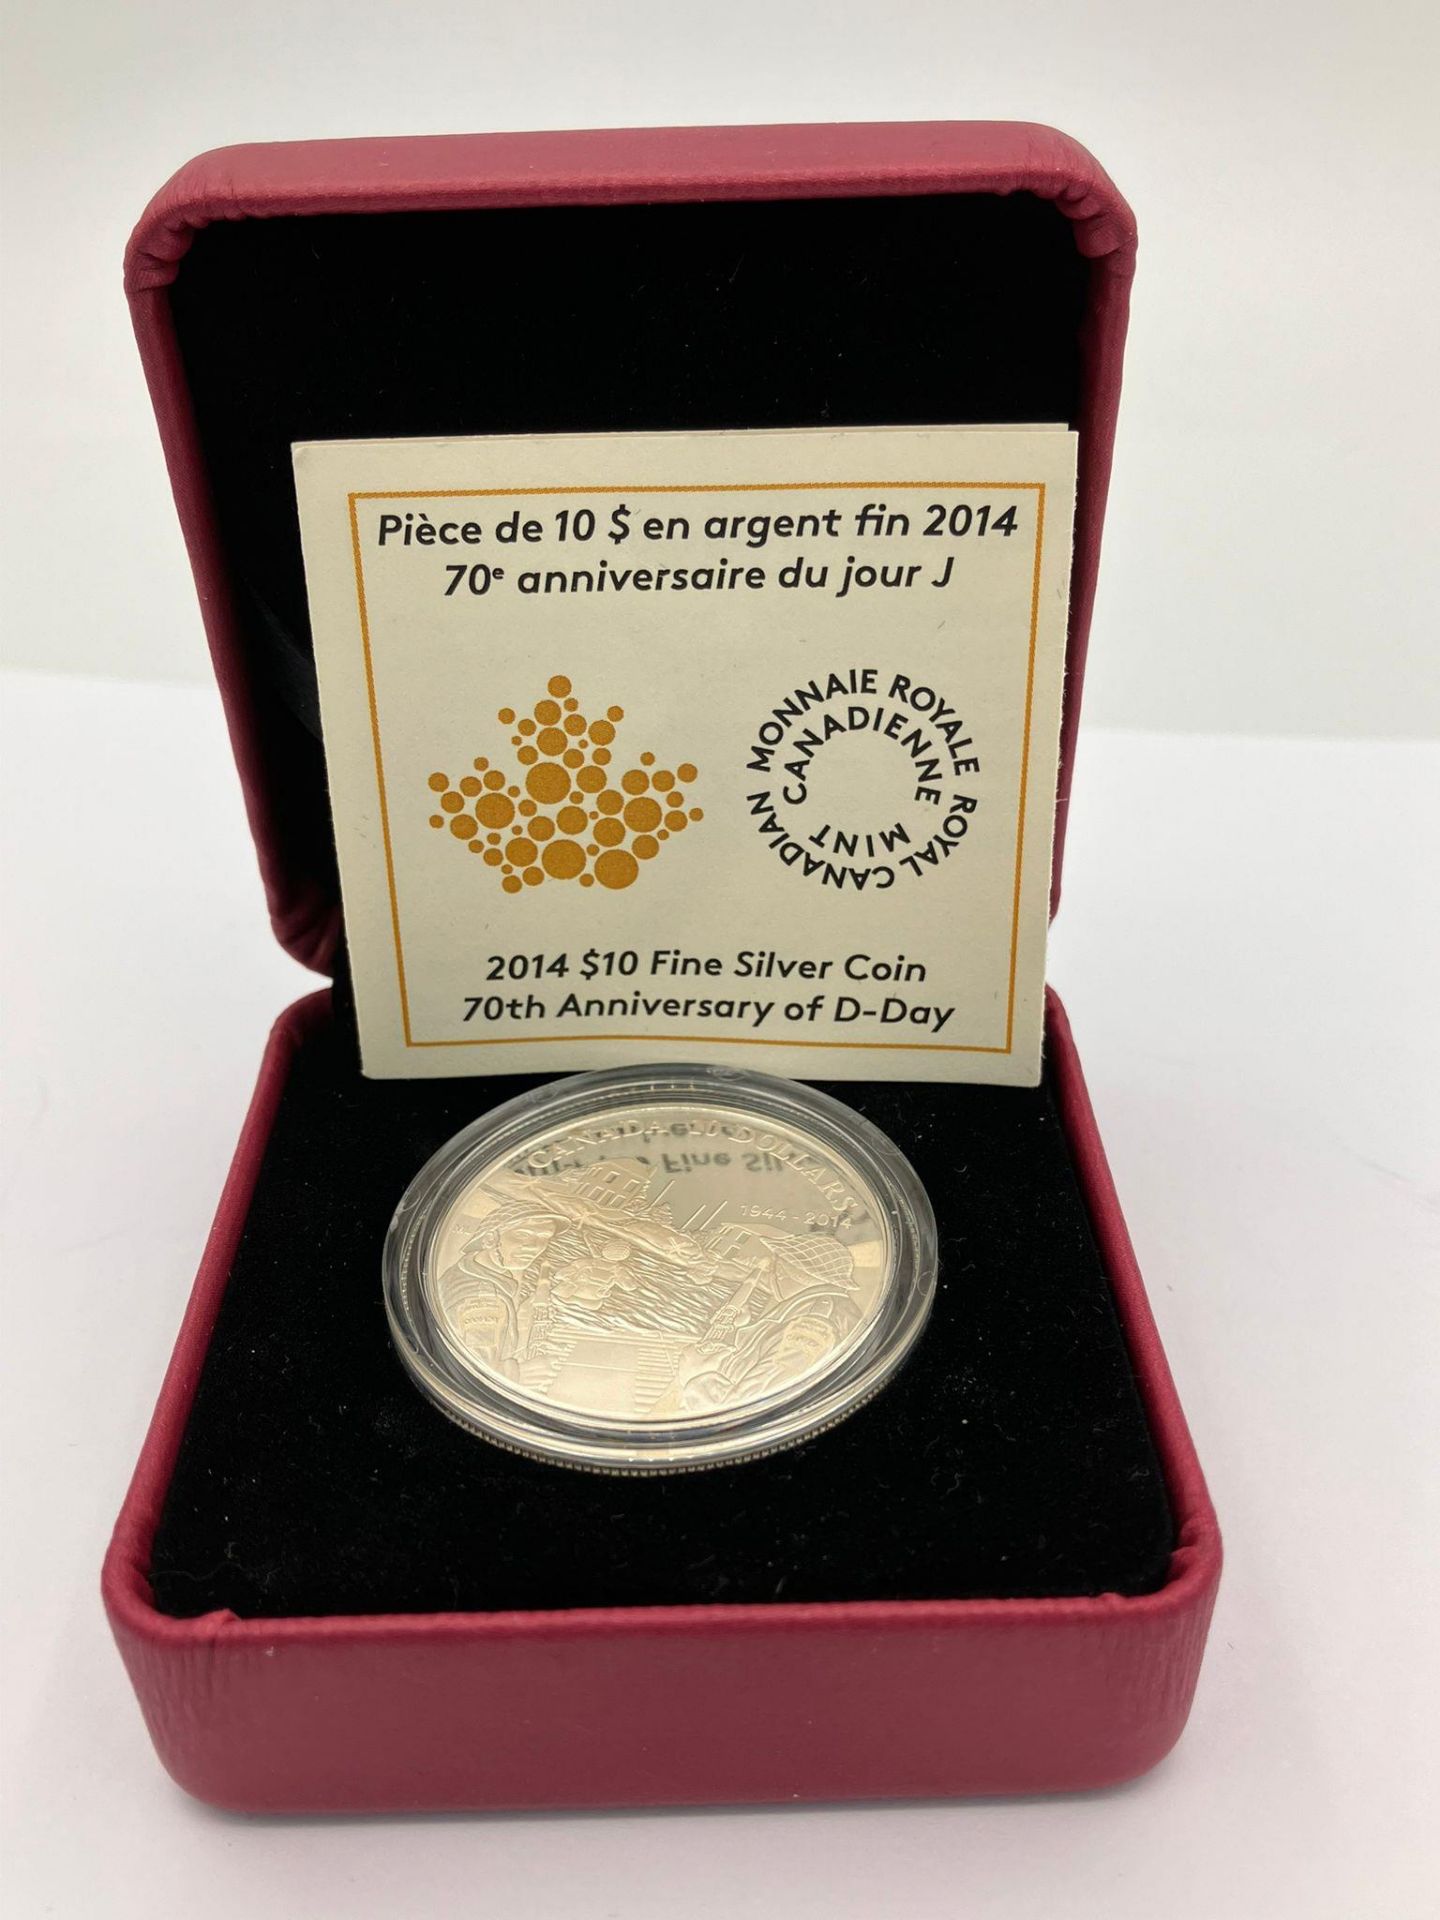 2014 CANADIAN D-DAY 10 DOLLAR COIN. Struck in PURE SILVER by the Royal Canadian Mint to - Bild 3 aus 7